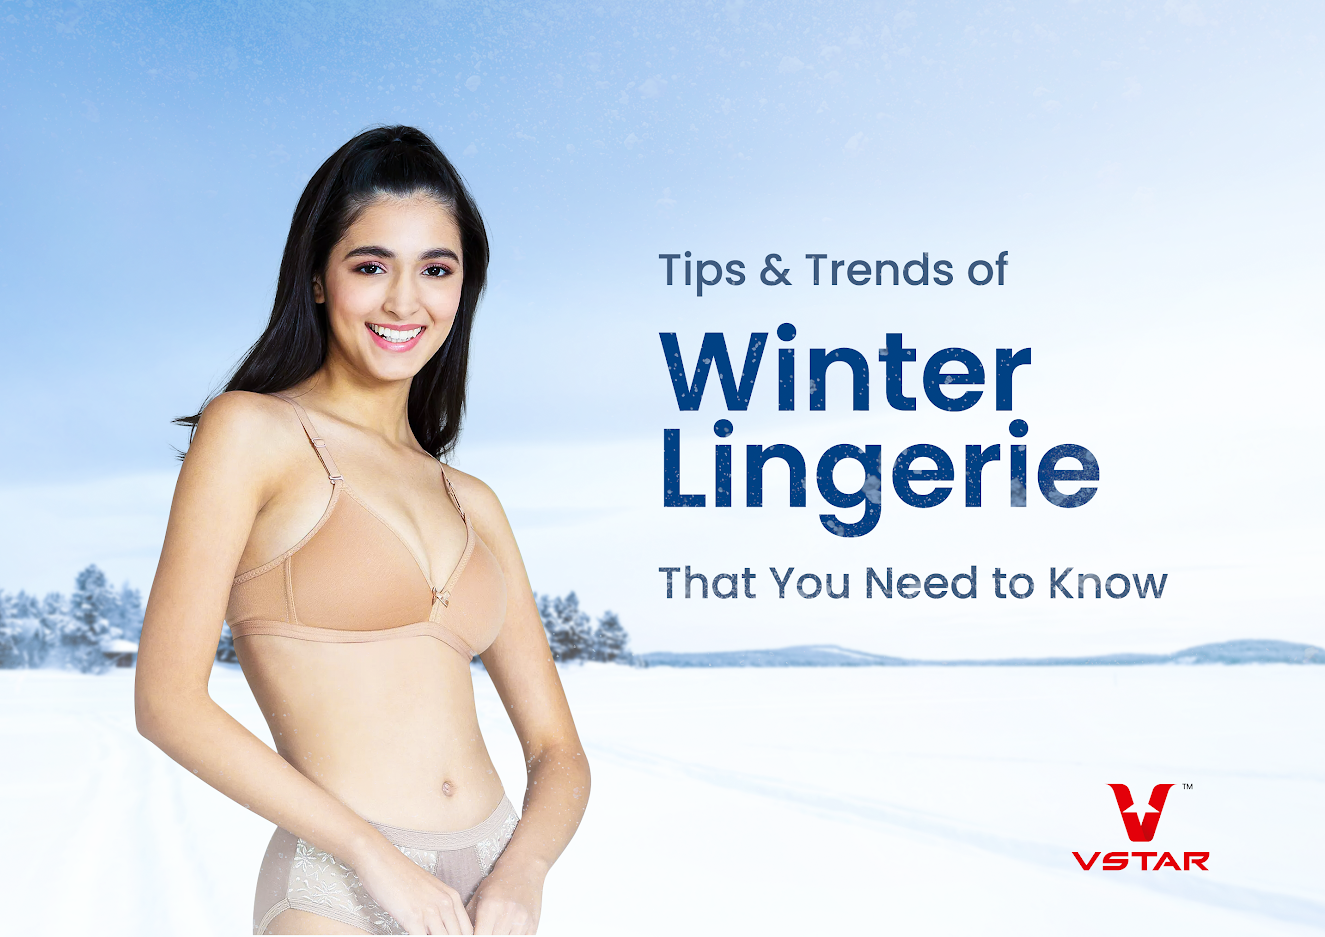 Tips & Trends of Winter Lingerie That You Need to Know